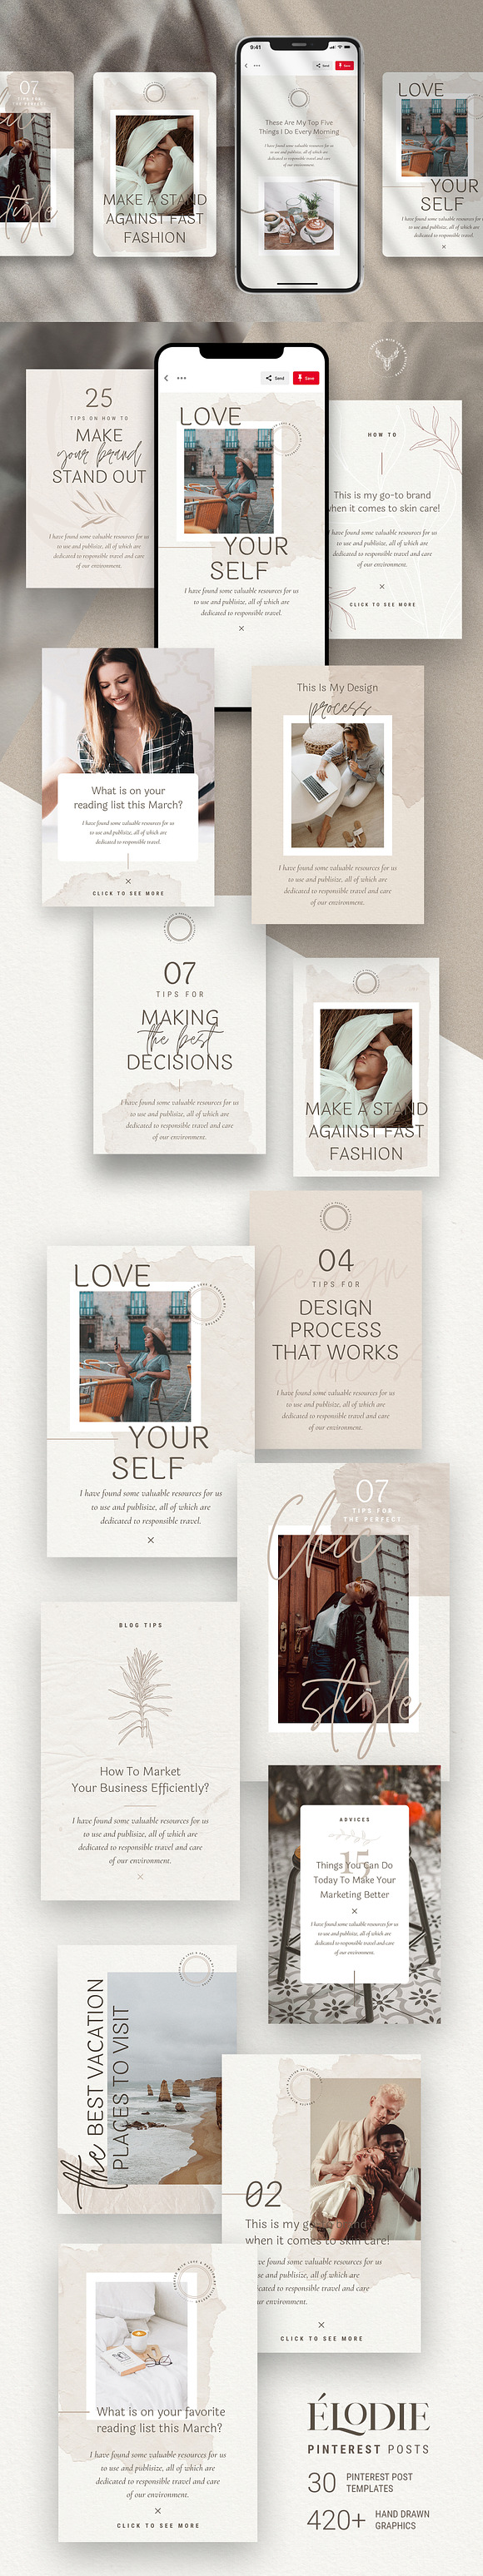 Elodie - Canva Pinterest Templates in Pinterest Templates - product preview 8